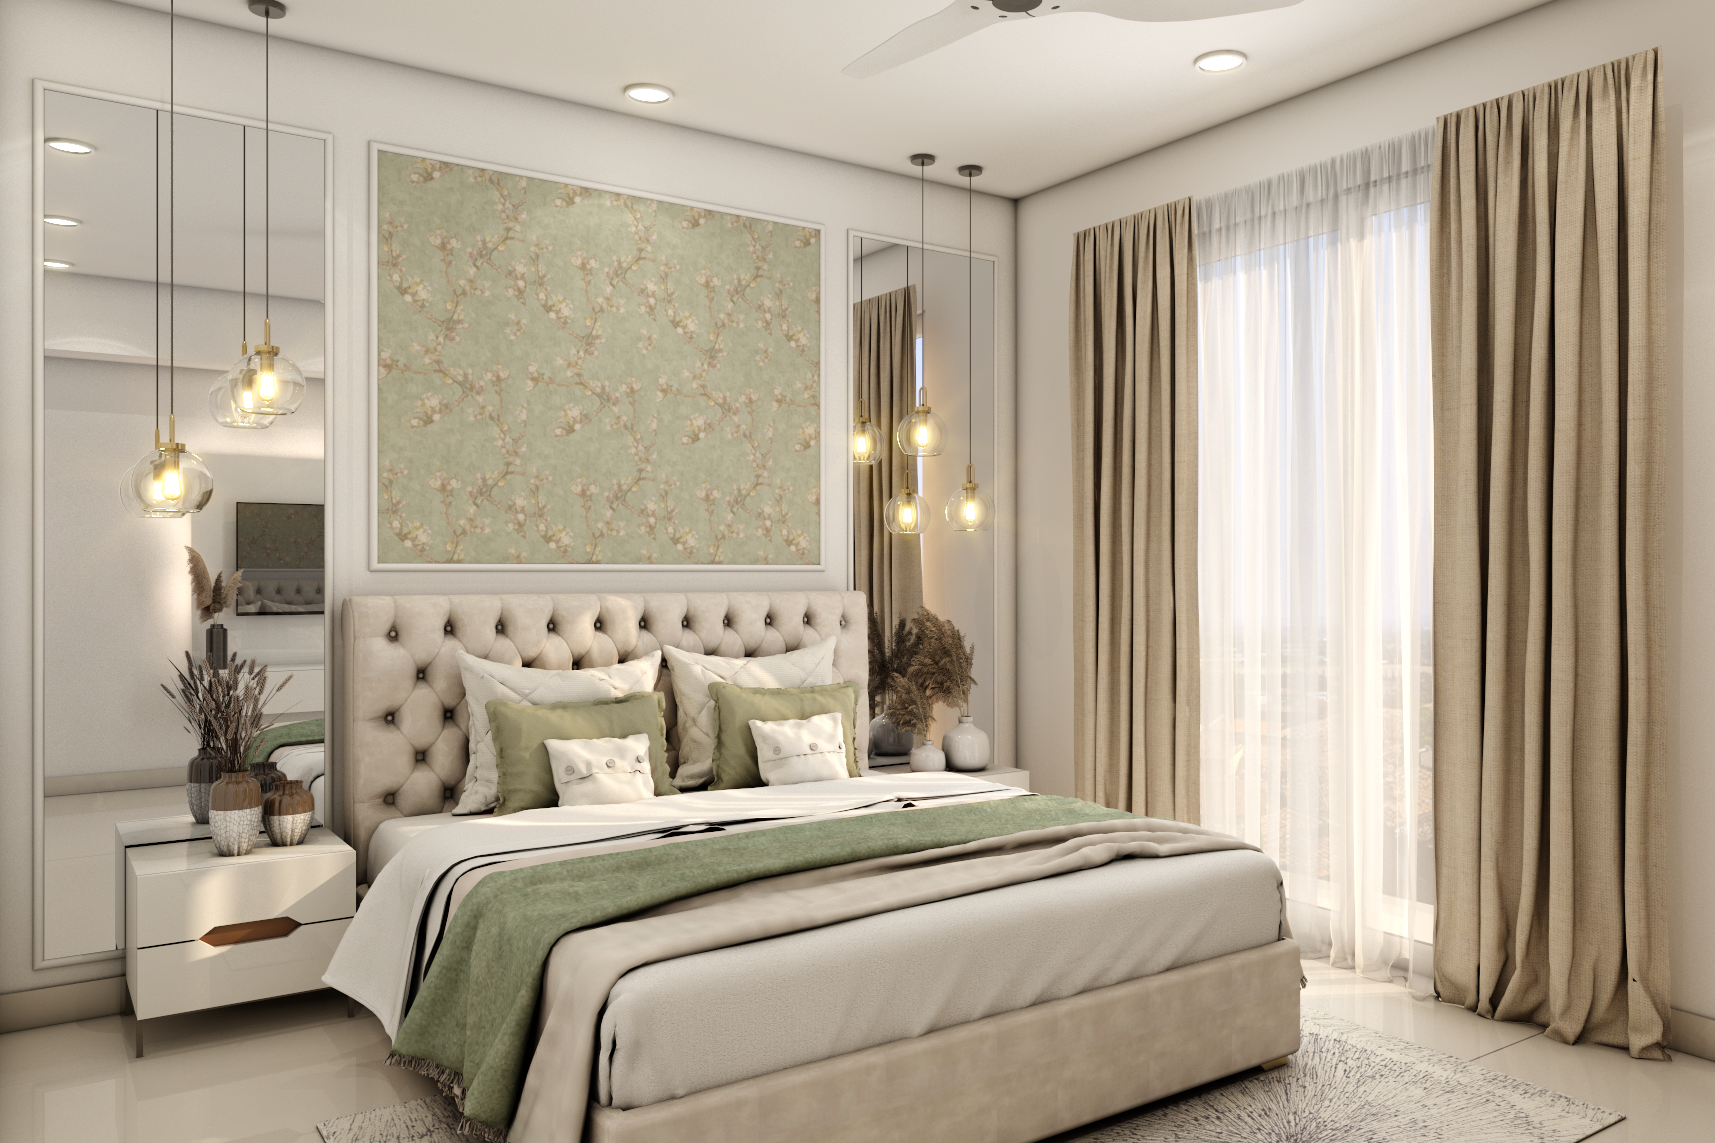 Pastel Green and Beige-Themed Master Bedroom Design